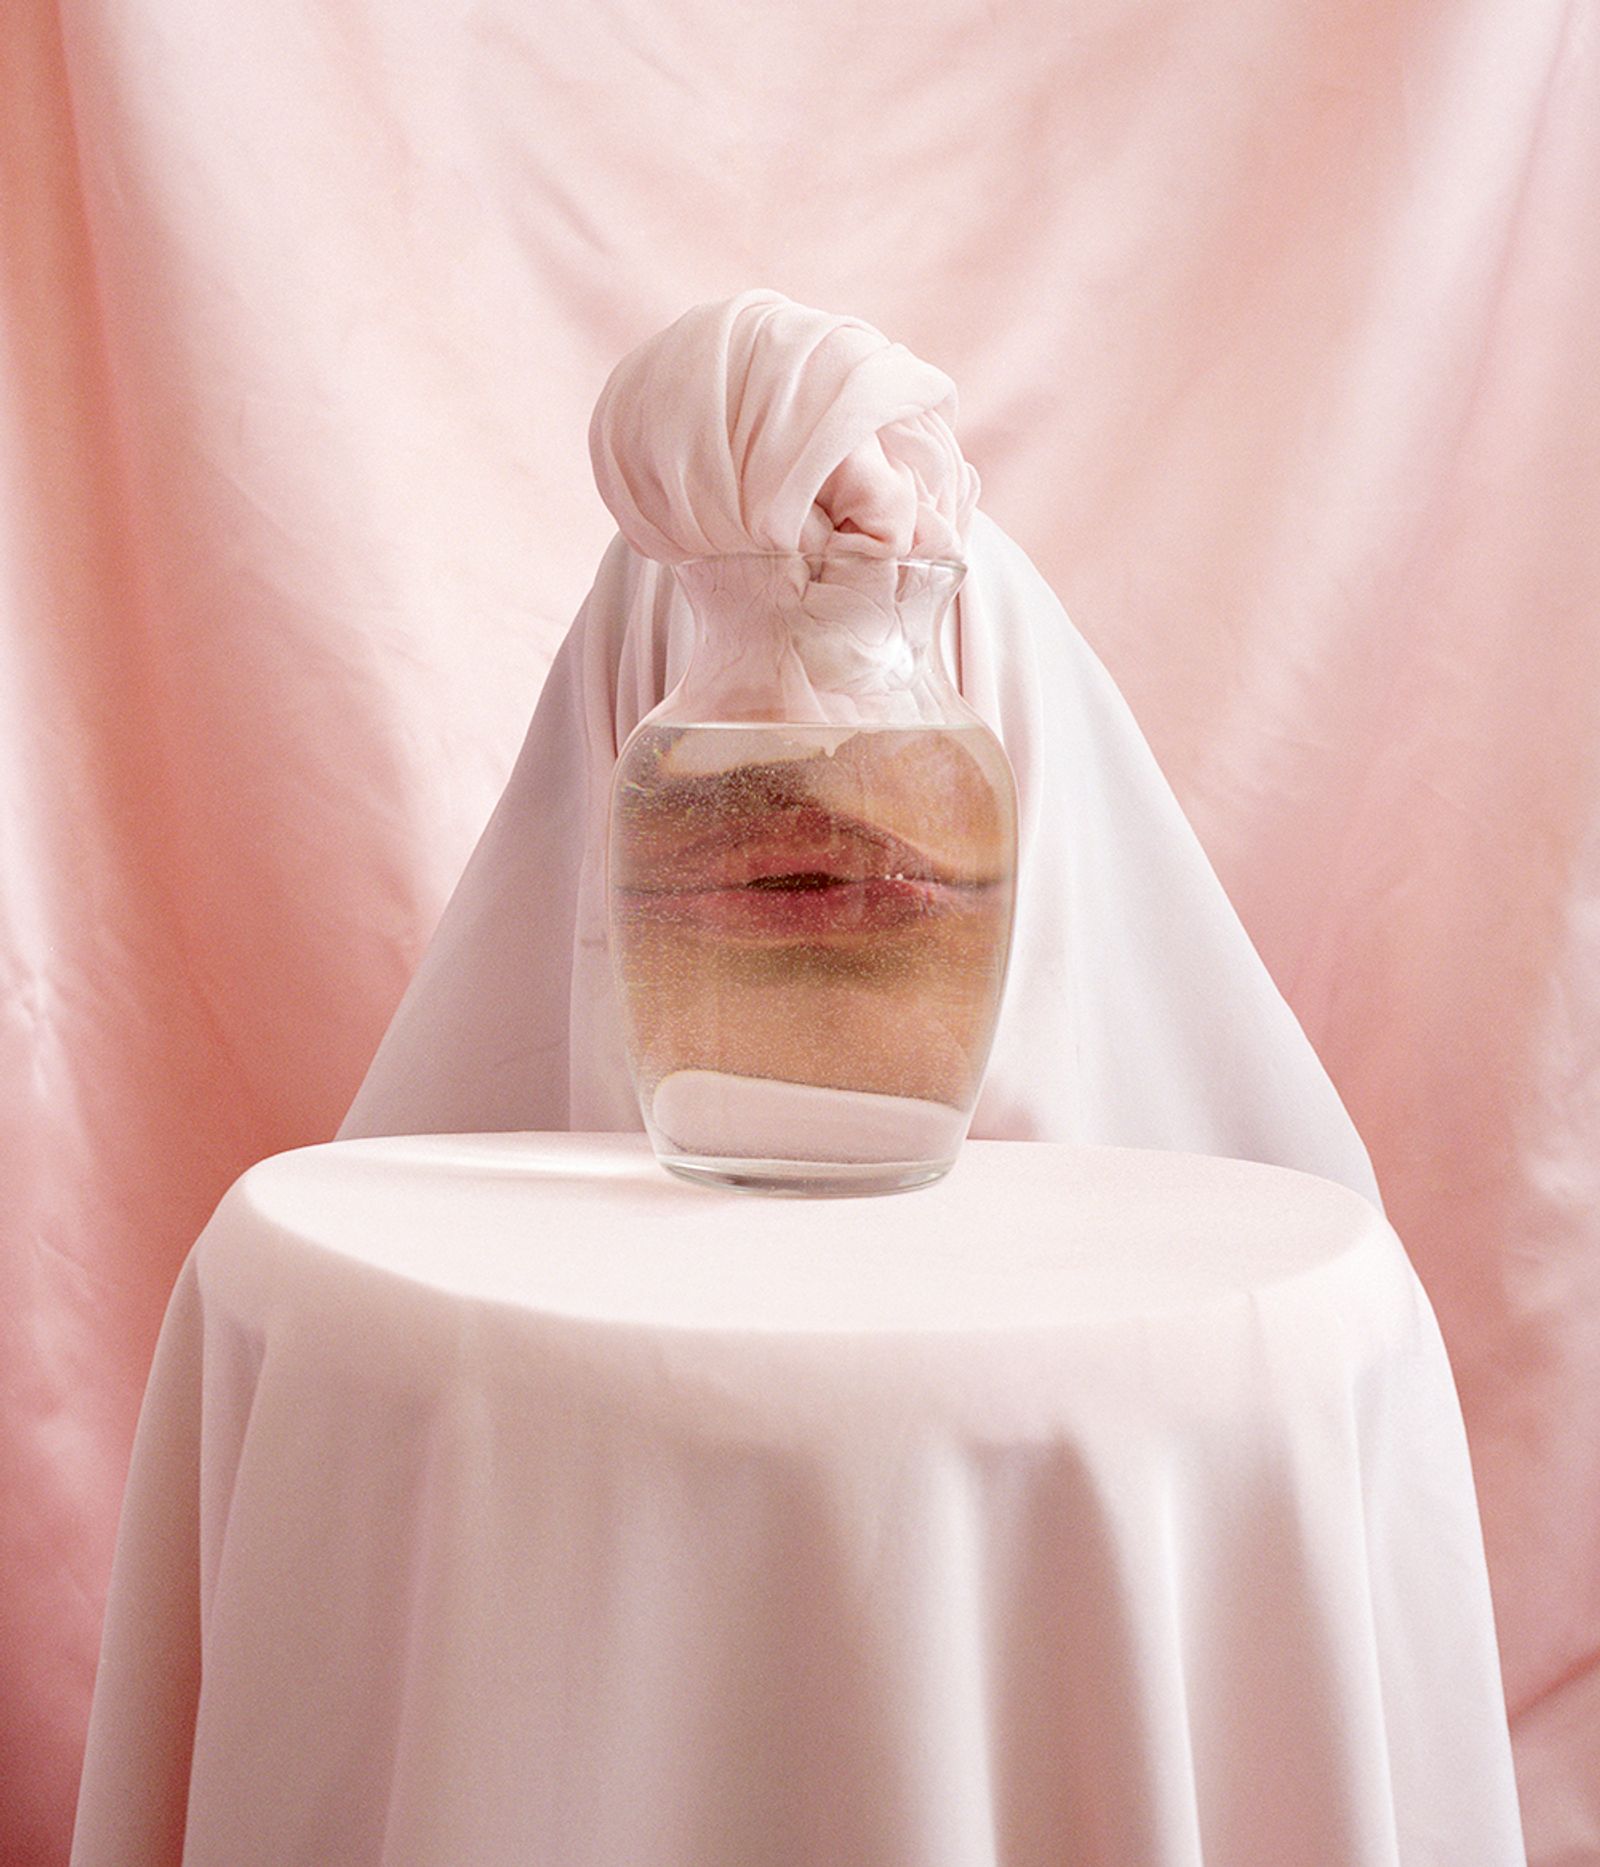 © Maha Alasaker - Image from the LIFE CYCLE & A TRAP CALLED THE BODY photography project